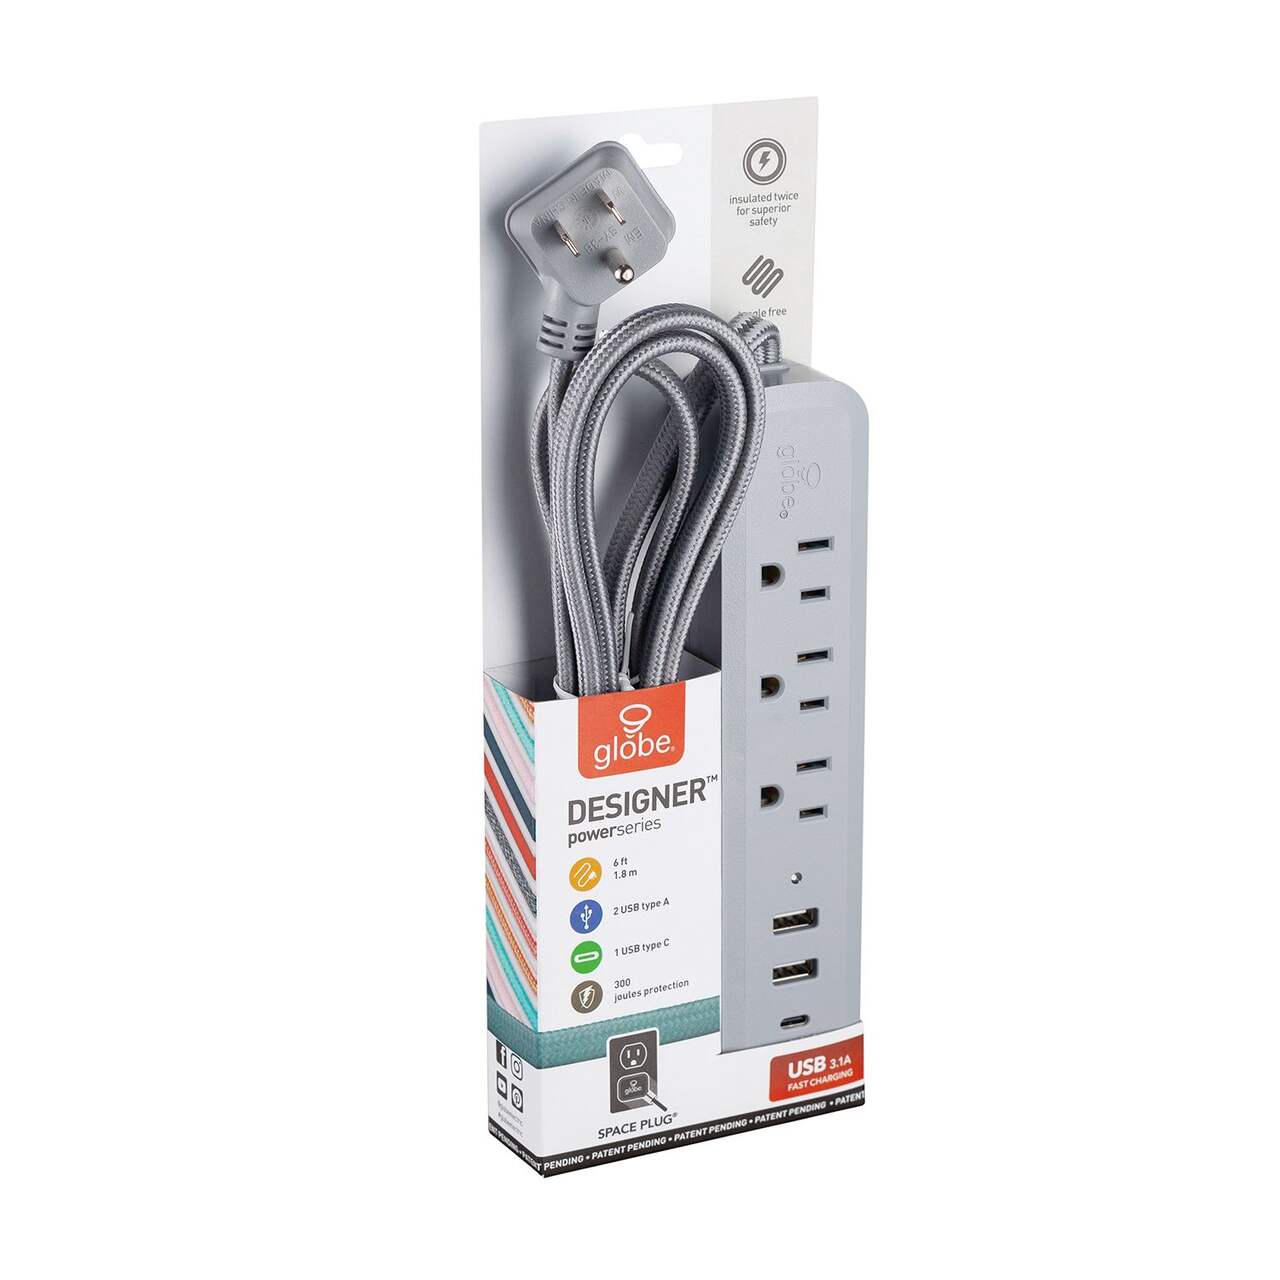 Globe Designer 3-Outlet Surge Protector Power Bar with 3 USB Outlets, 6-ft